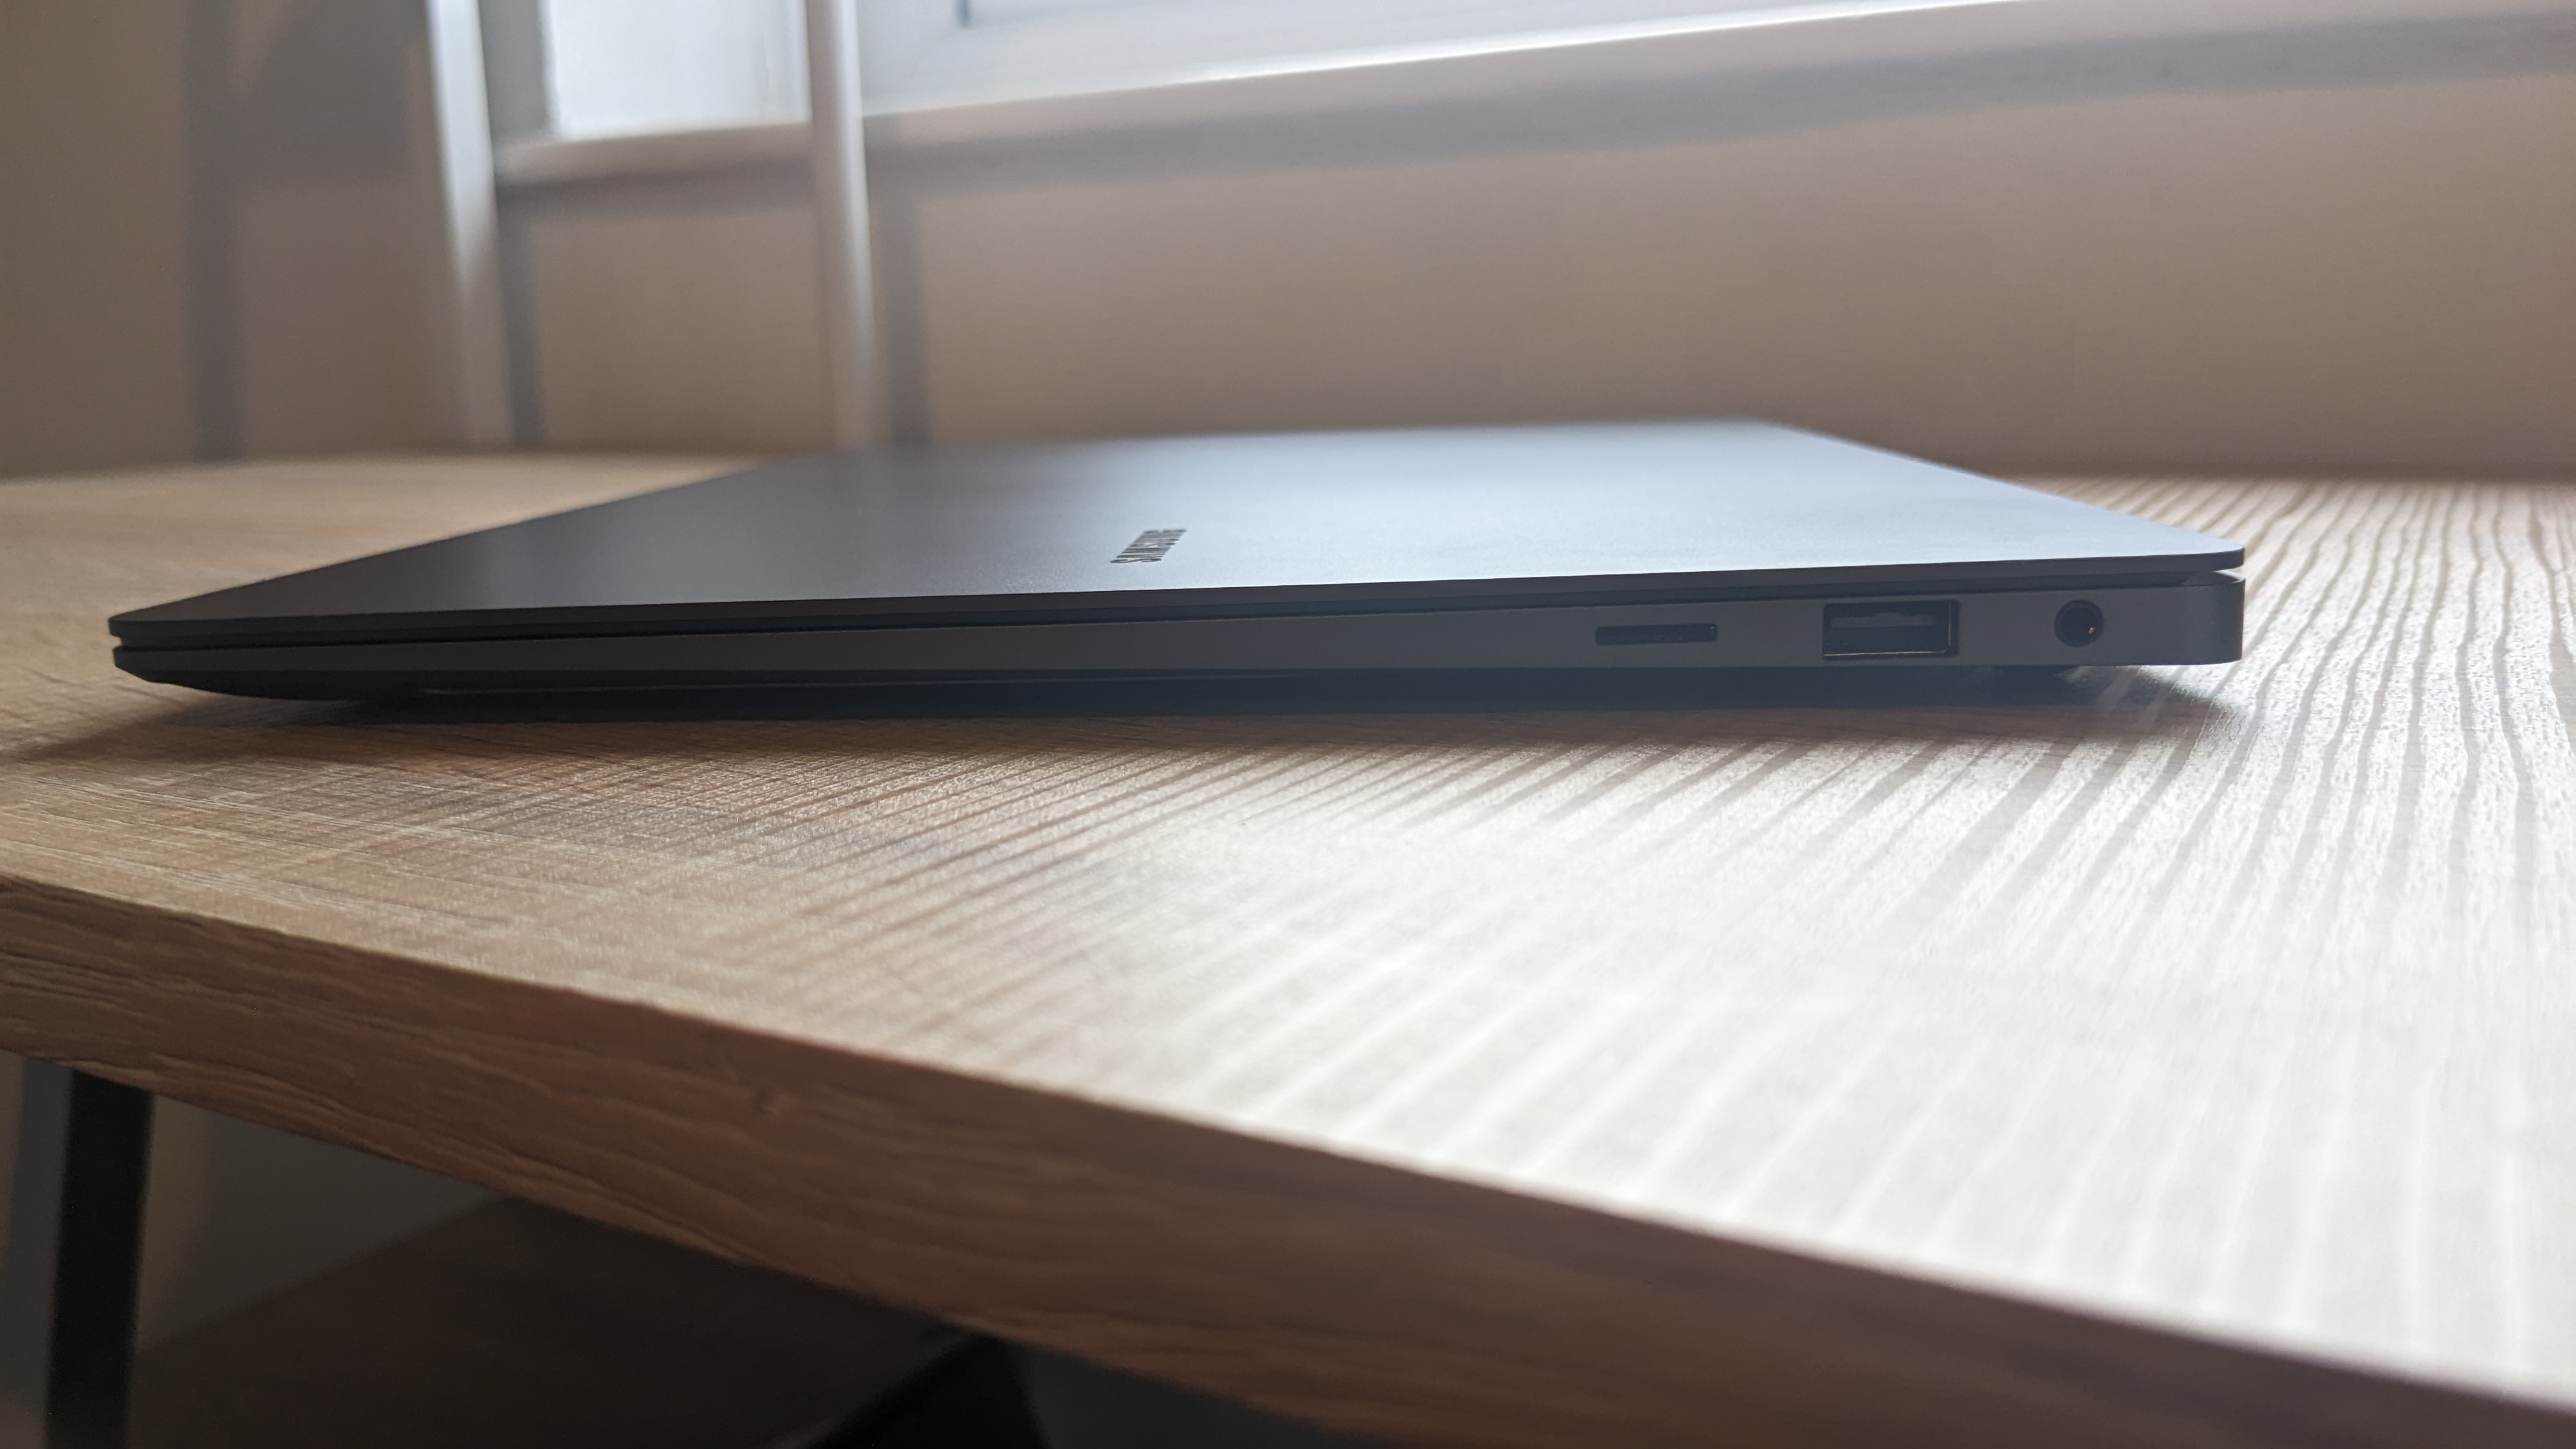 The Samsung Galaxy Book3 Pro 14-inch laptop pictured atop a wooden desk.